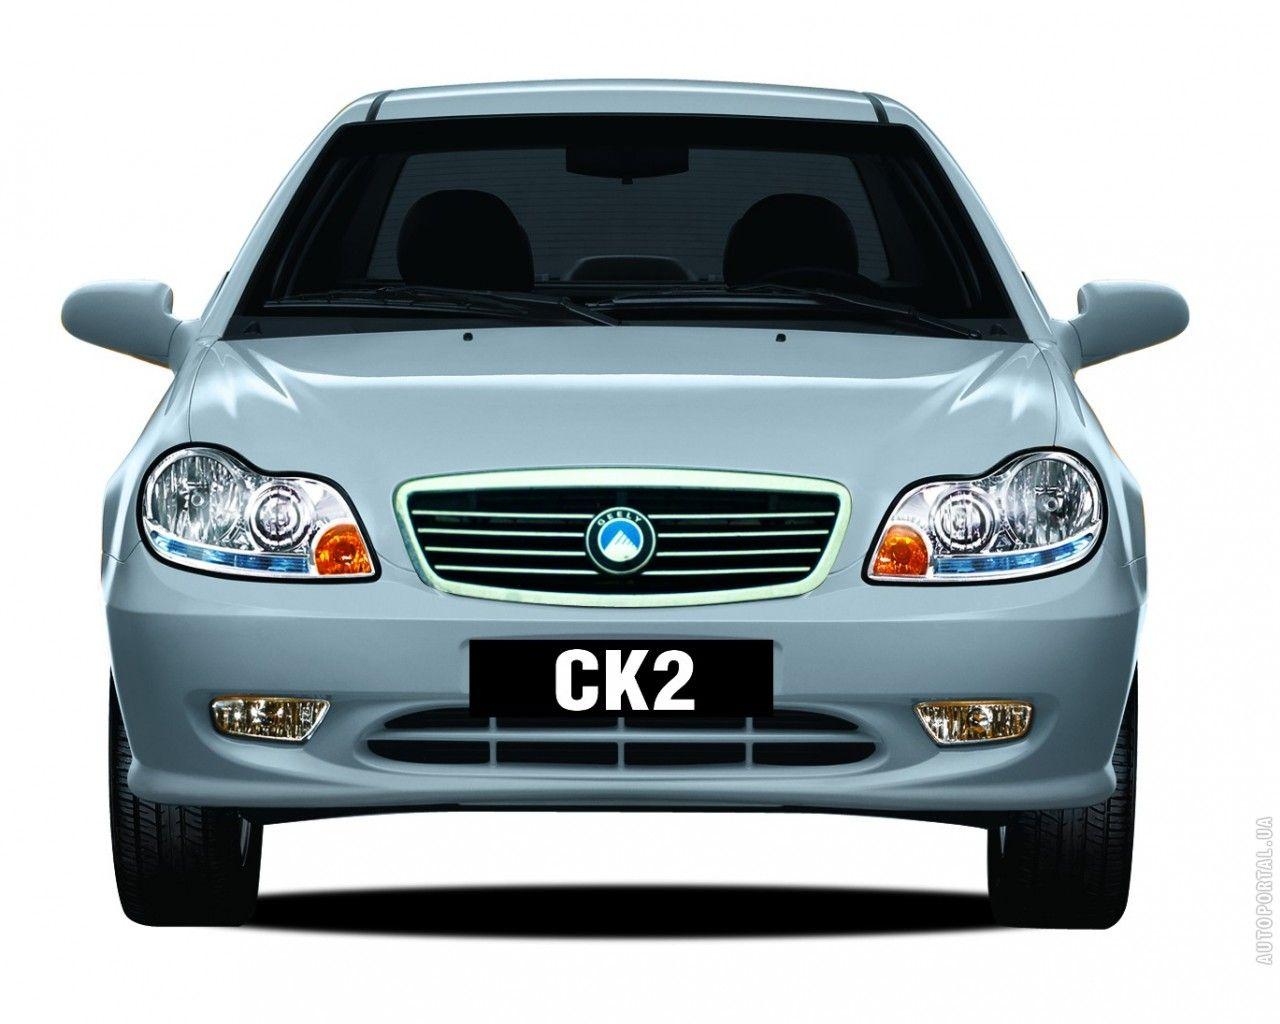 geely ck2 2013 car wallpaper Picture Collection. Car Picture